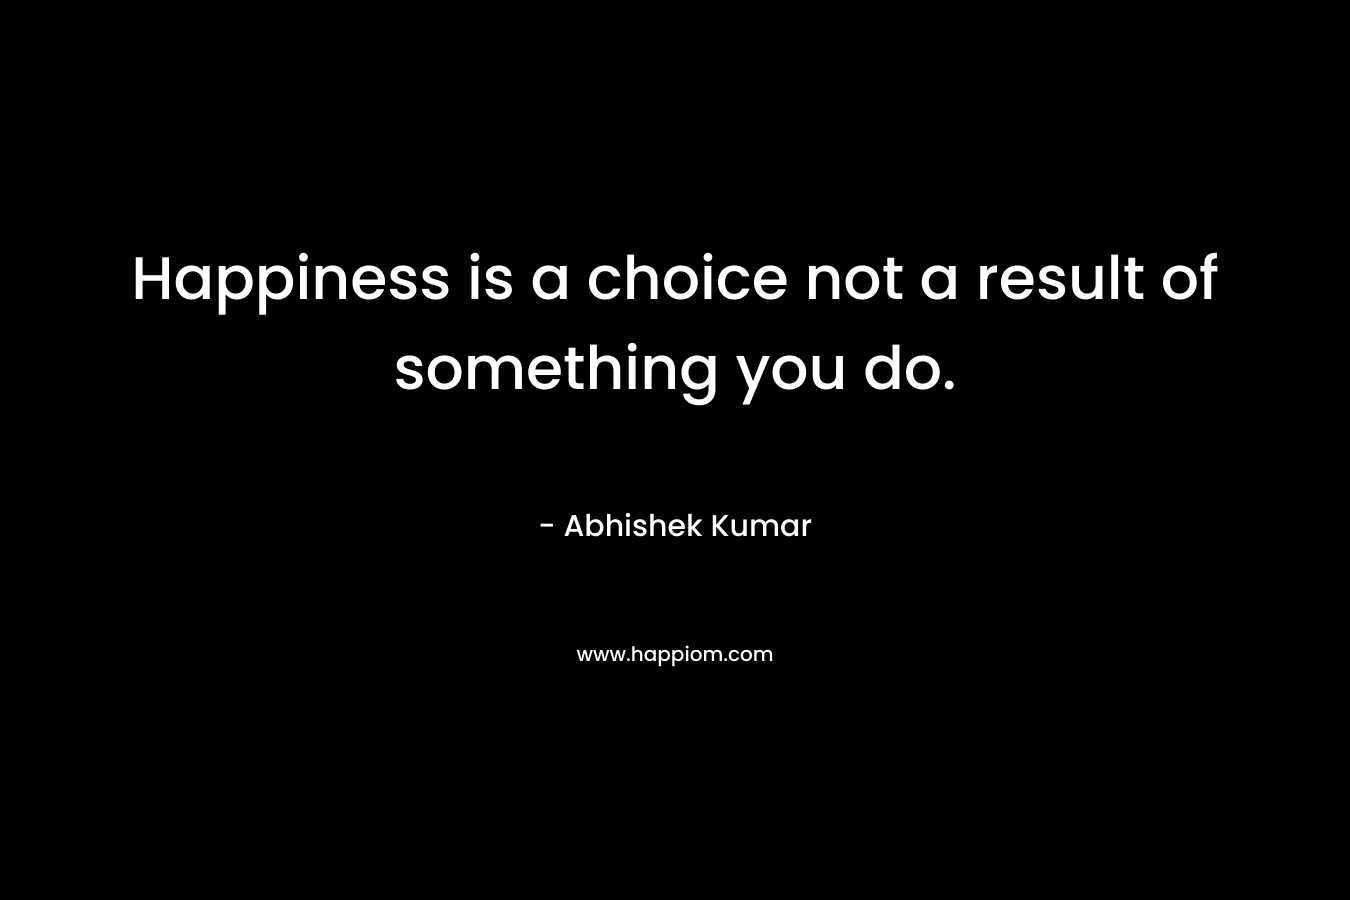 Happiness is a choice not a result of something you do.